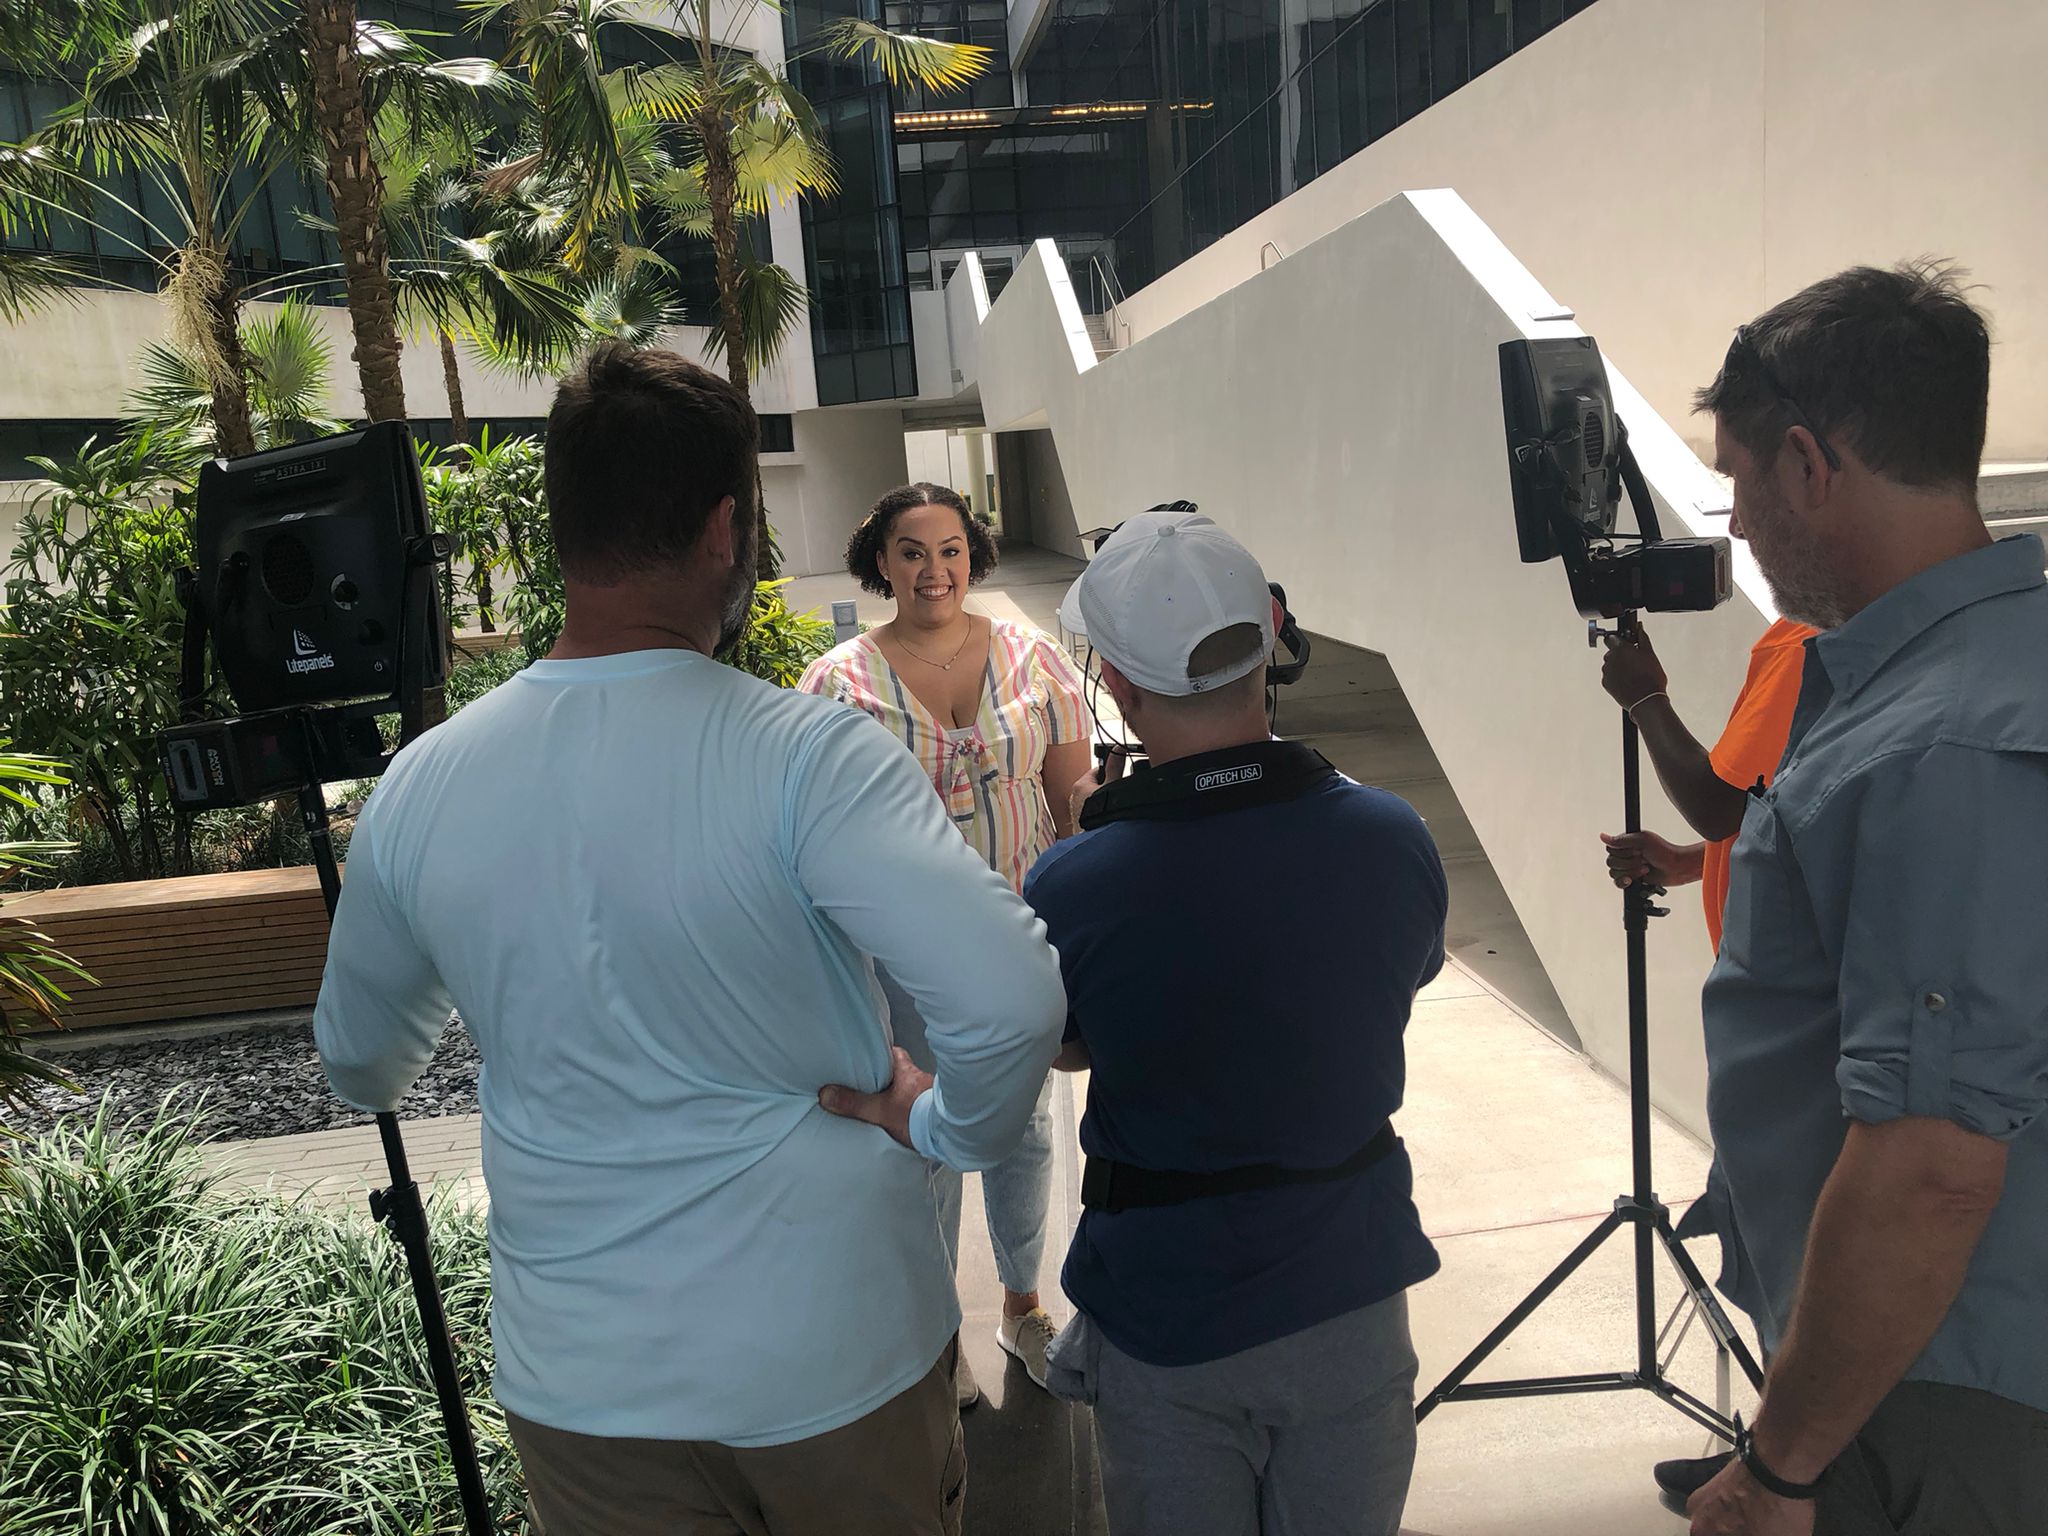 Britney Shick films her segment of The College Tour outside of Academic Health Center 5 at Florida International University.